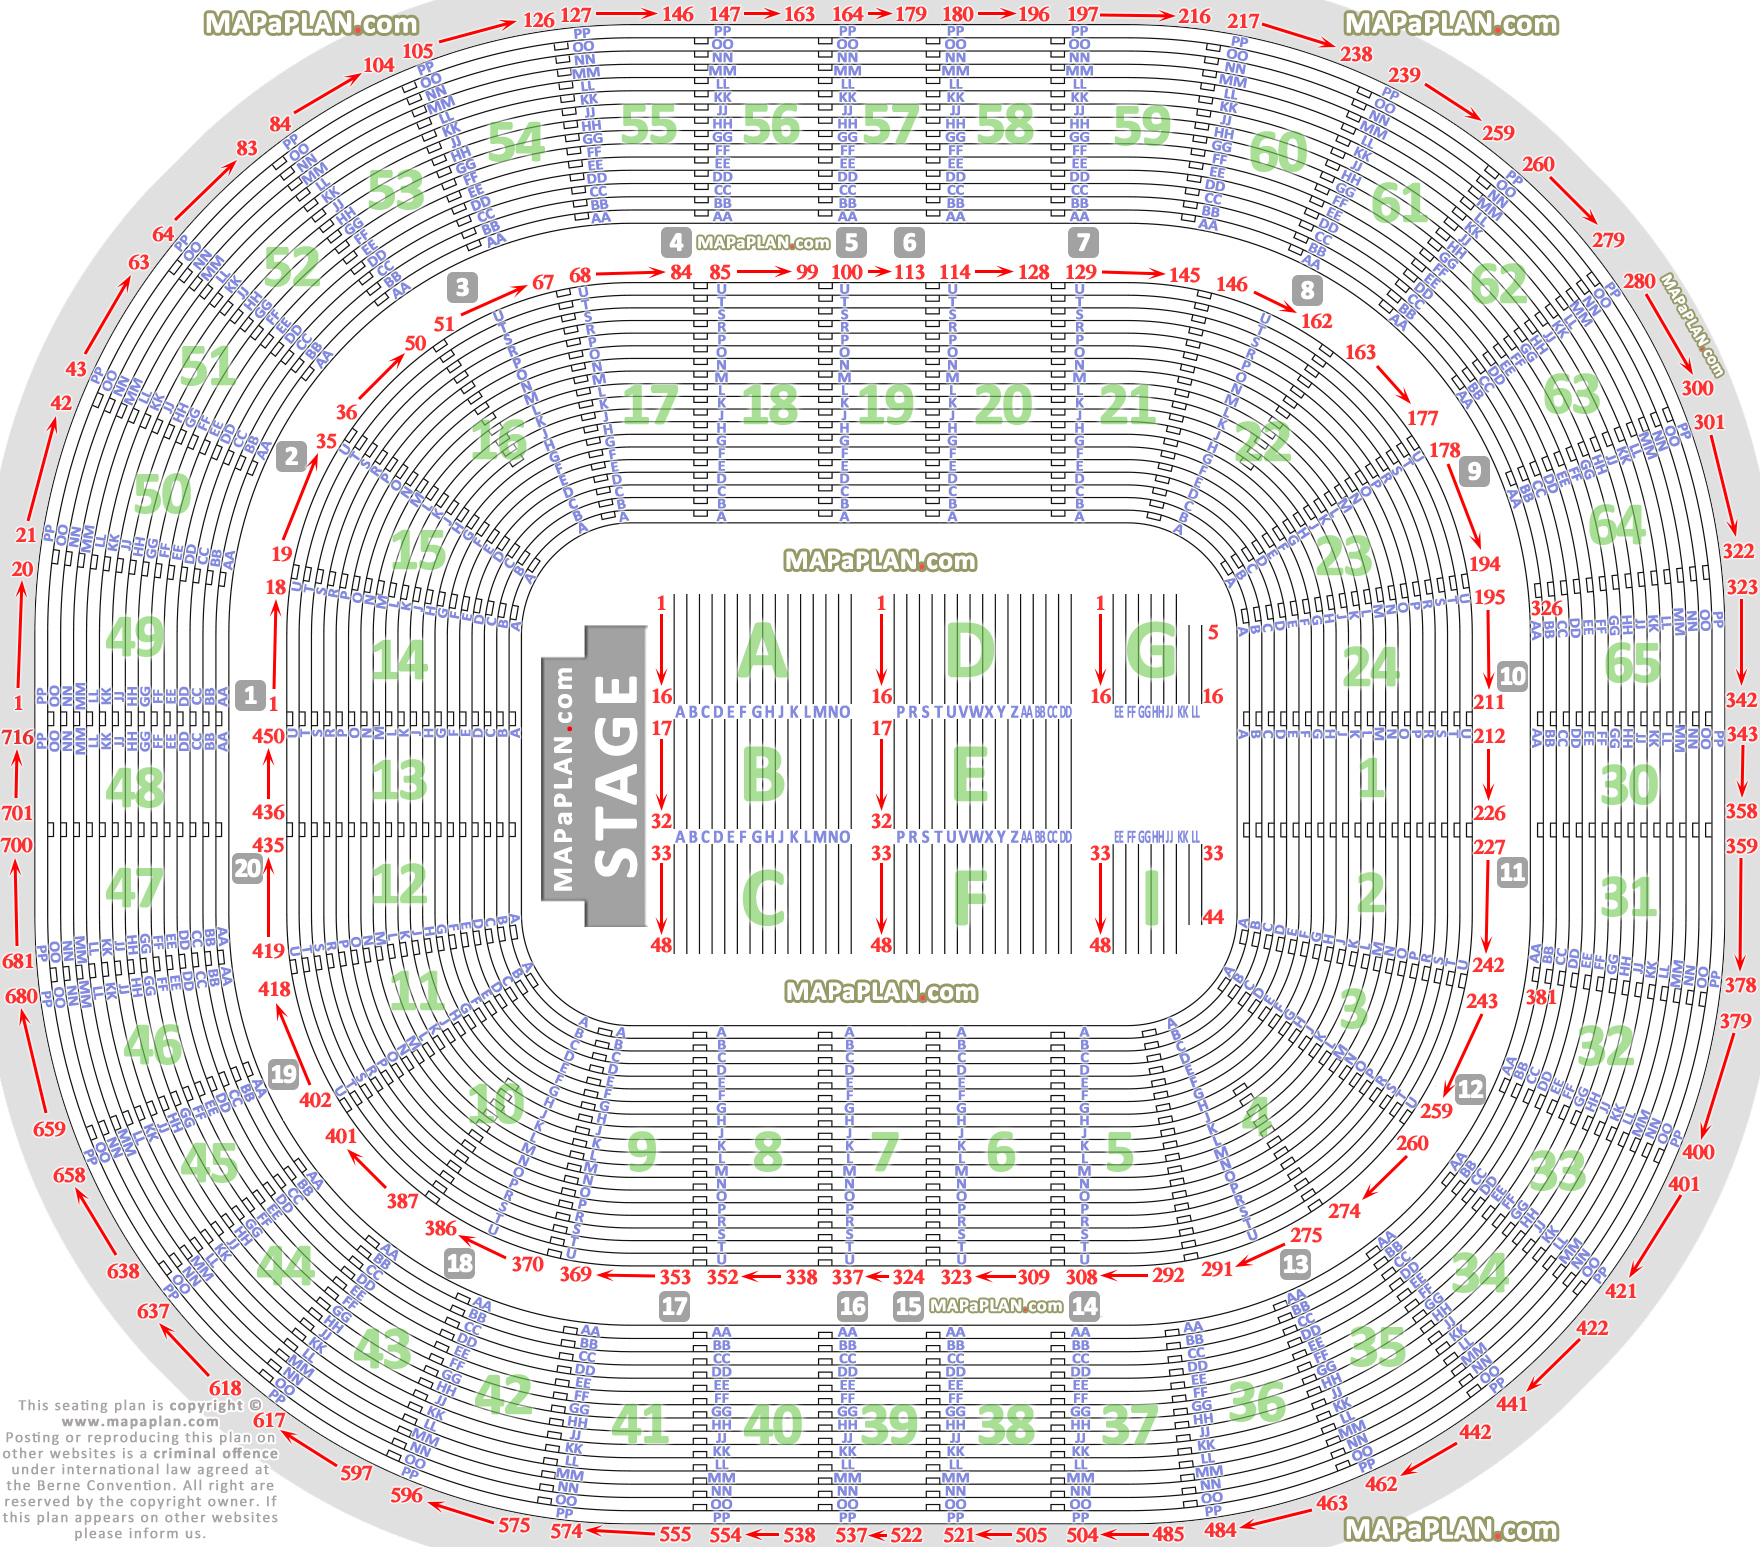 Melbourne Rod Laver Arena Detailed seat & row numbers